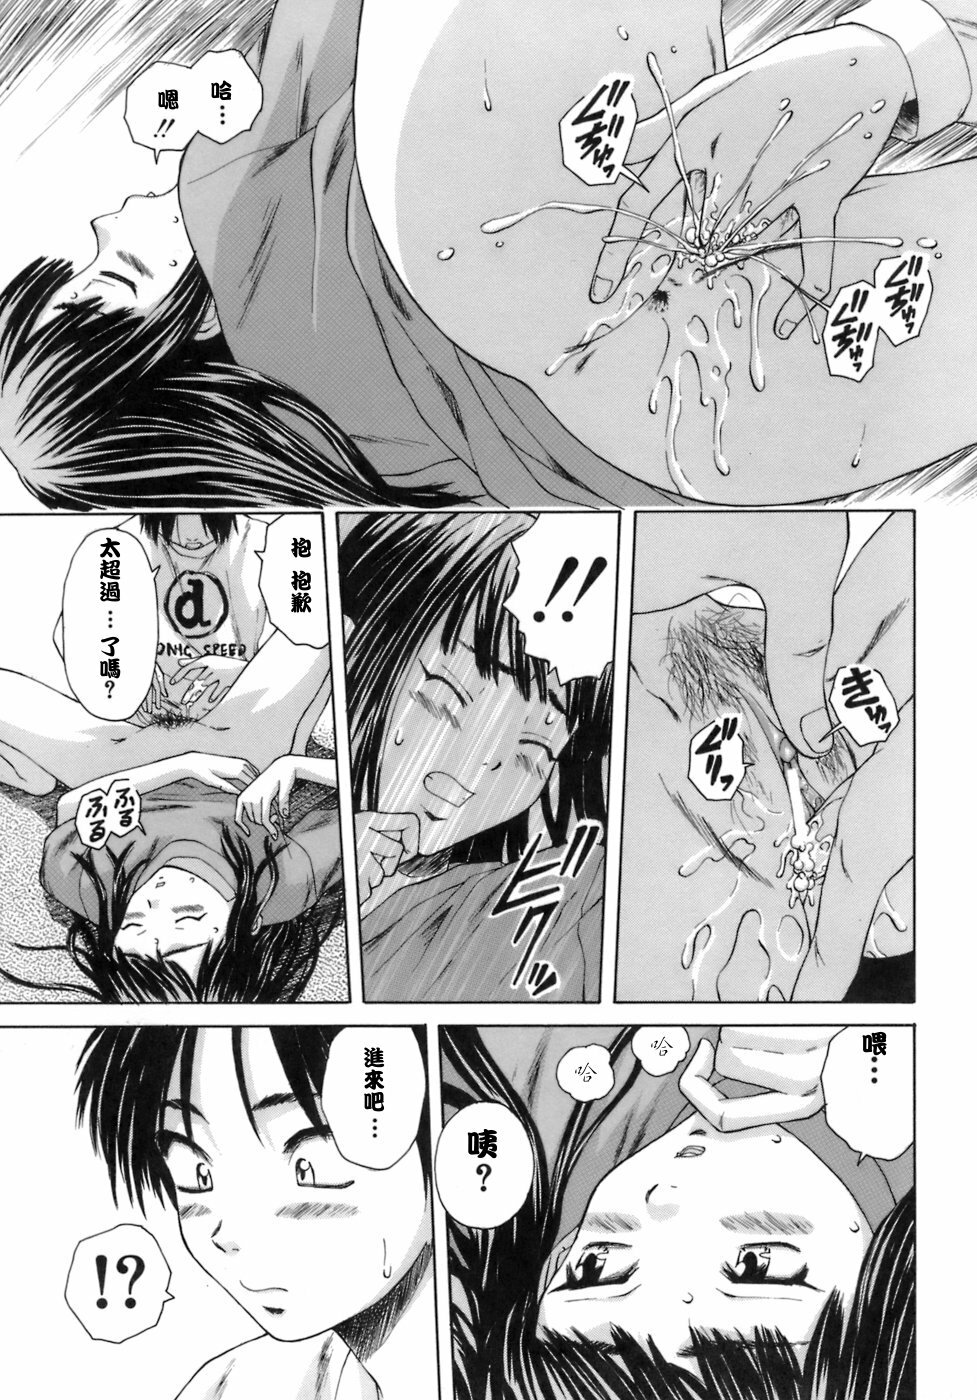 [Fuuga] Kyoushi to Seito to - Teacher and Student [Chinese] [悠月工房] page 32 full